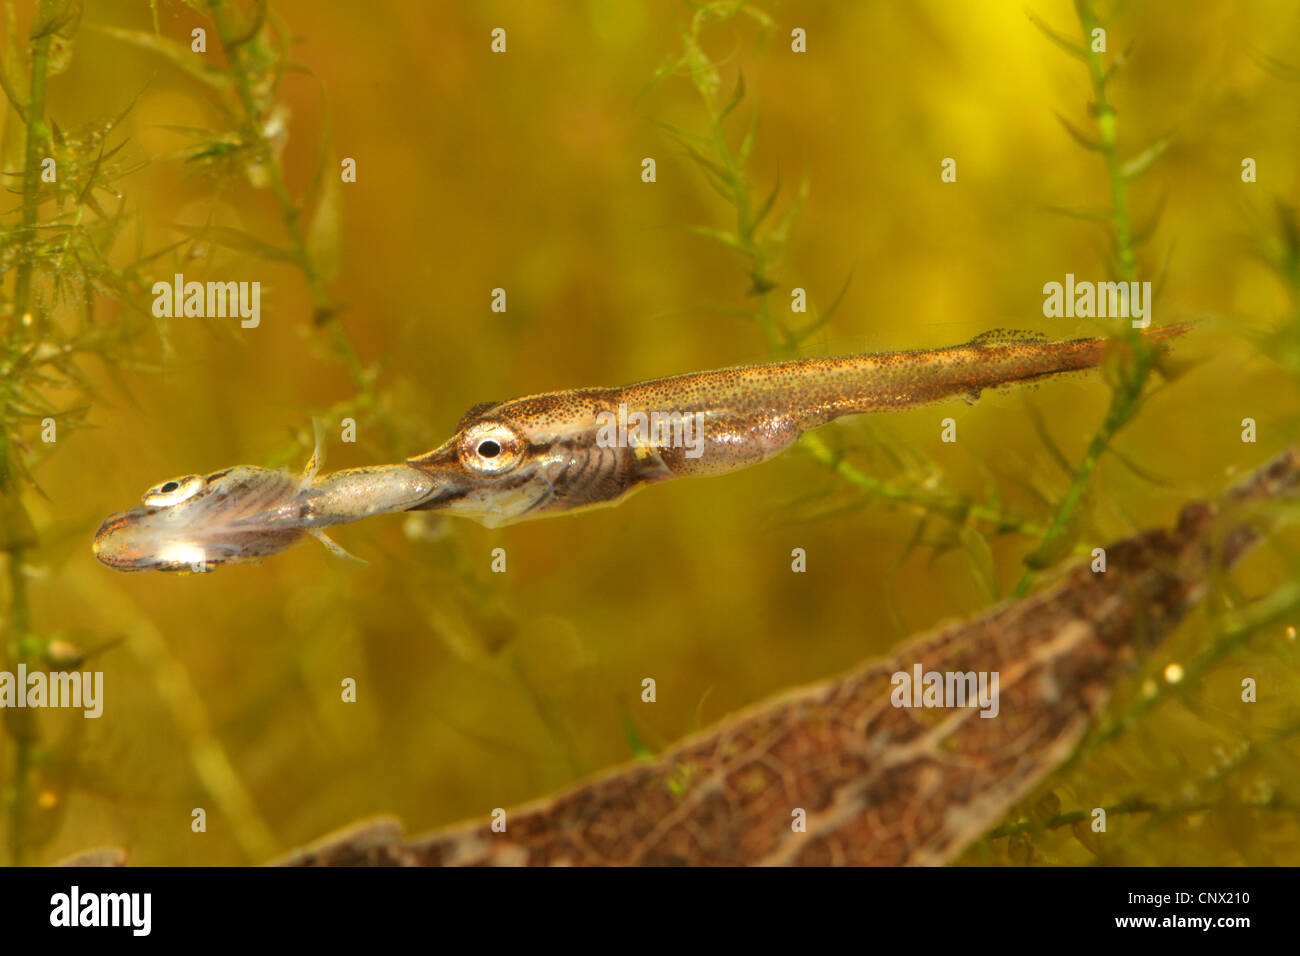 pike, northern pike (Esox lucius), juvenile feeding on a fellow, cannibalism, Germany Stock Photo